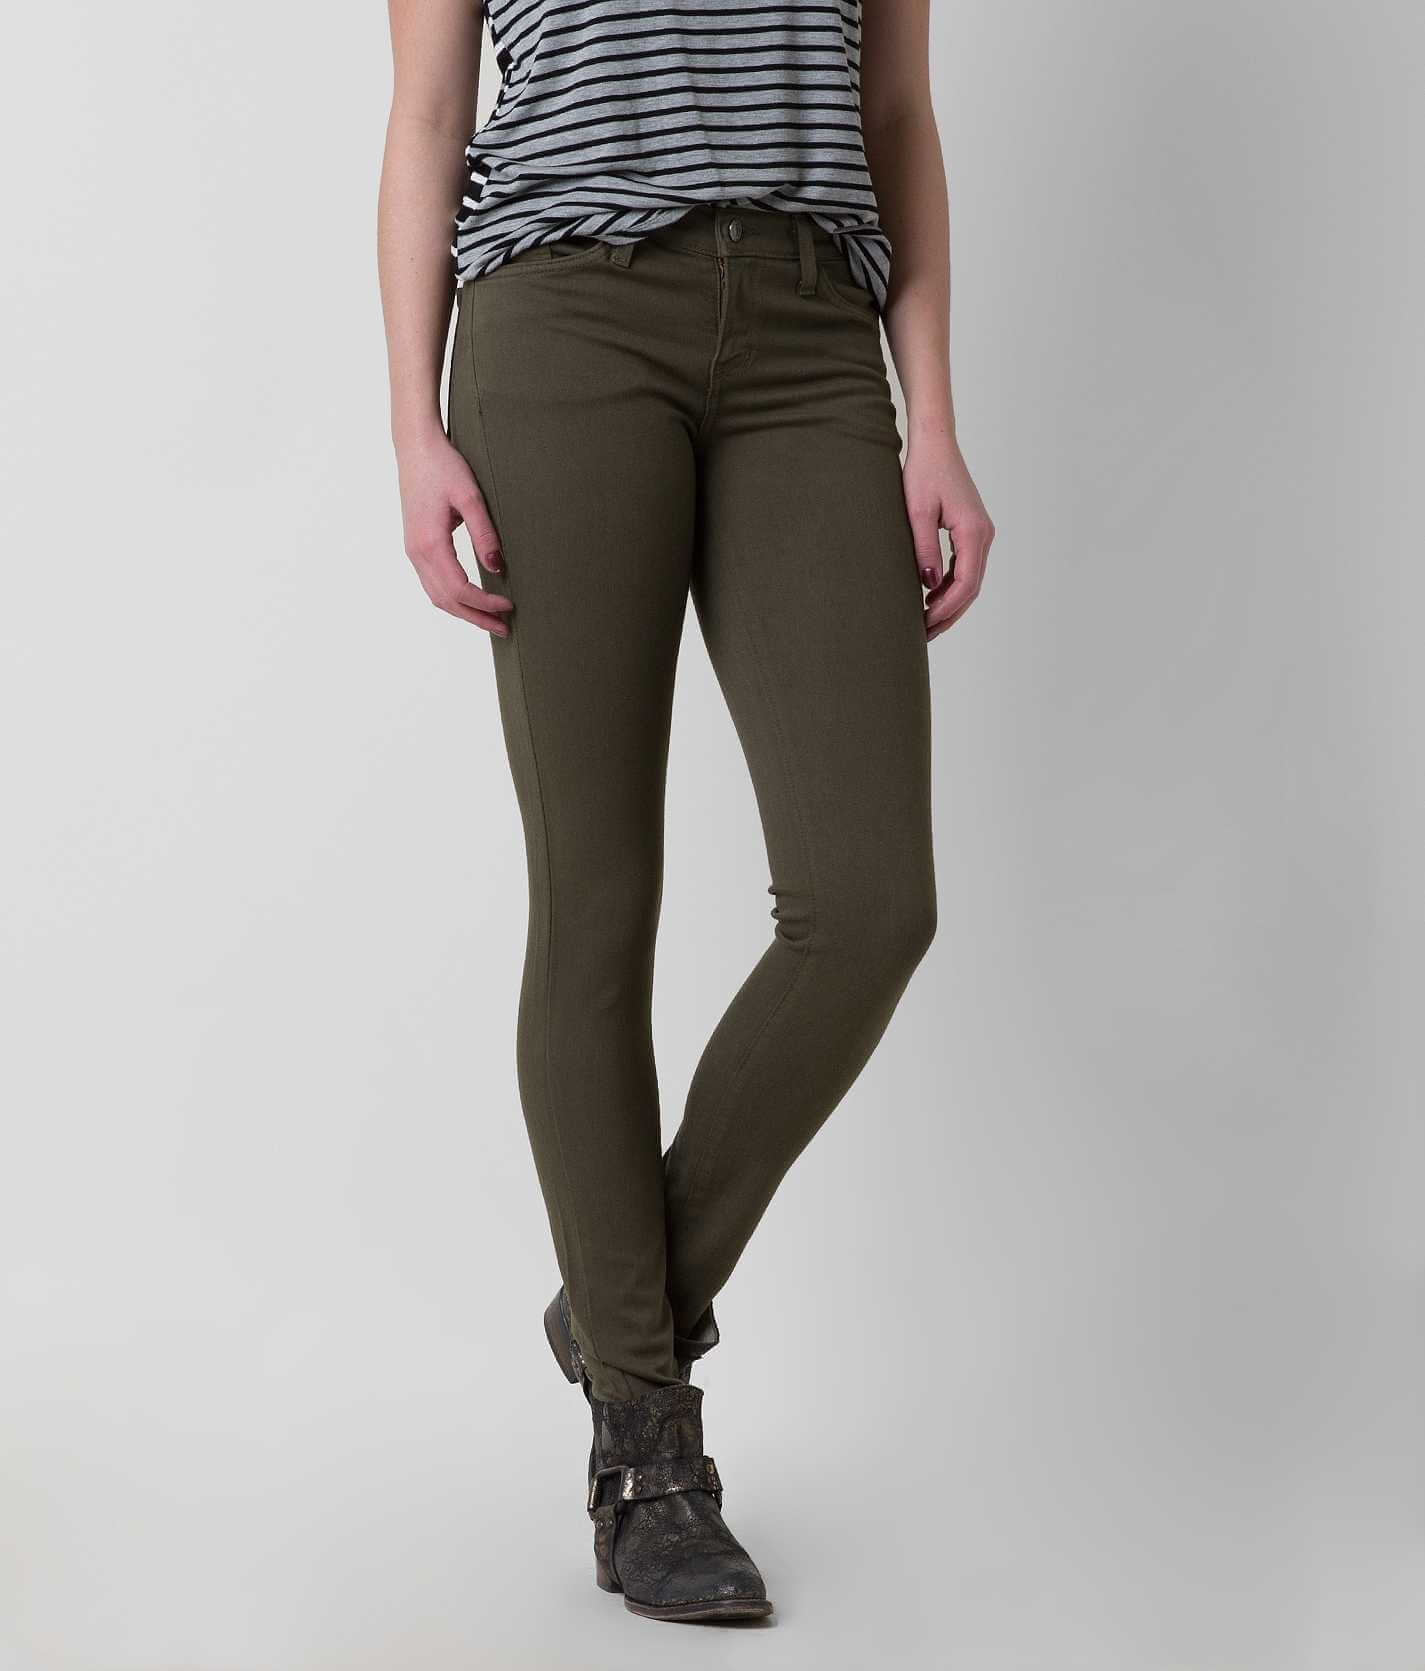 olive colored women's jeans